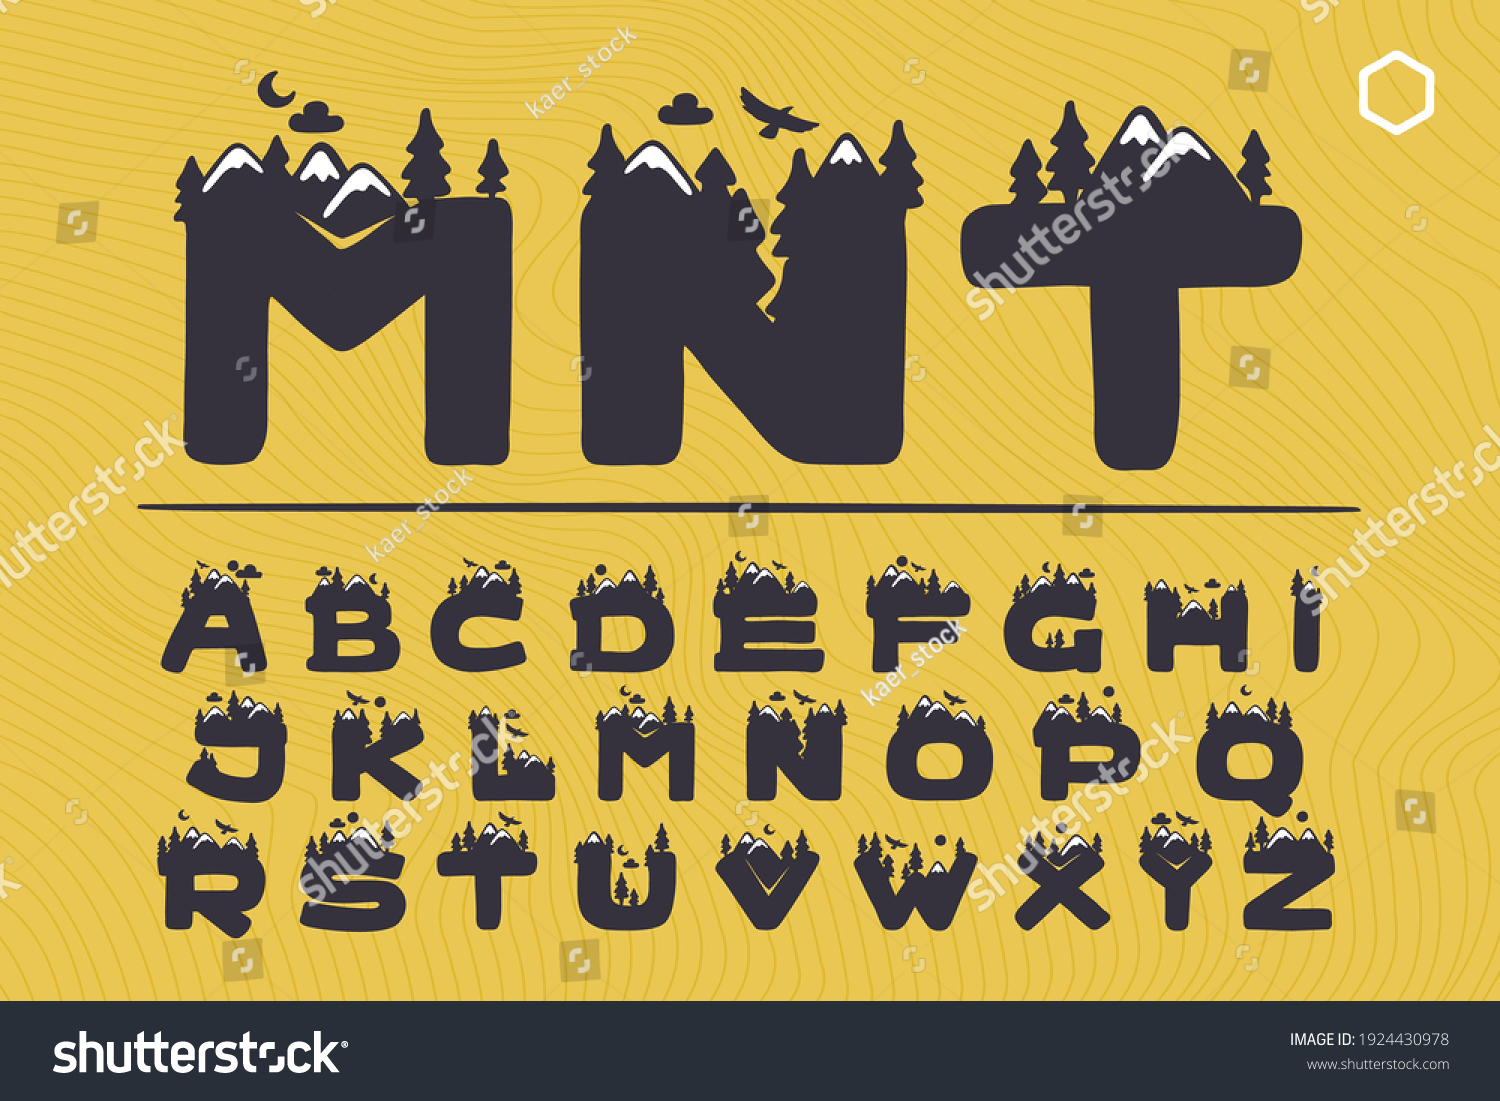 65,080 Mountain lettering Images, Stock Photos & Vectors | Shutterstock